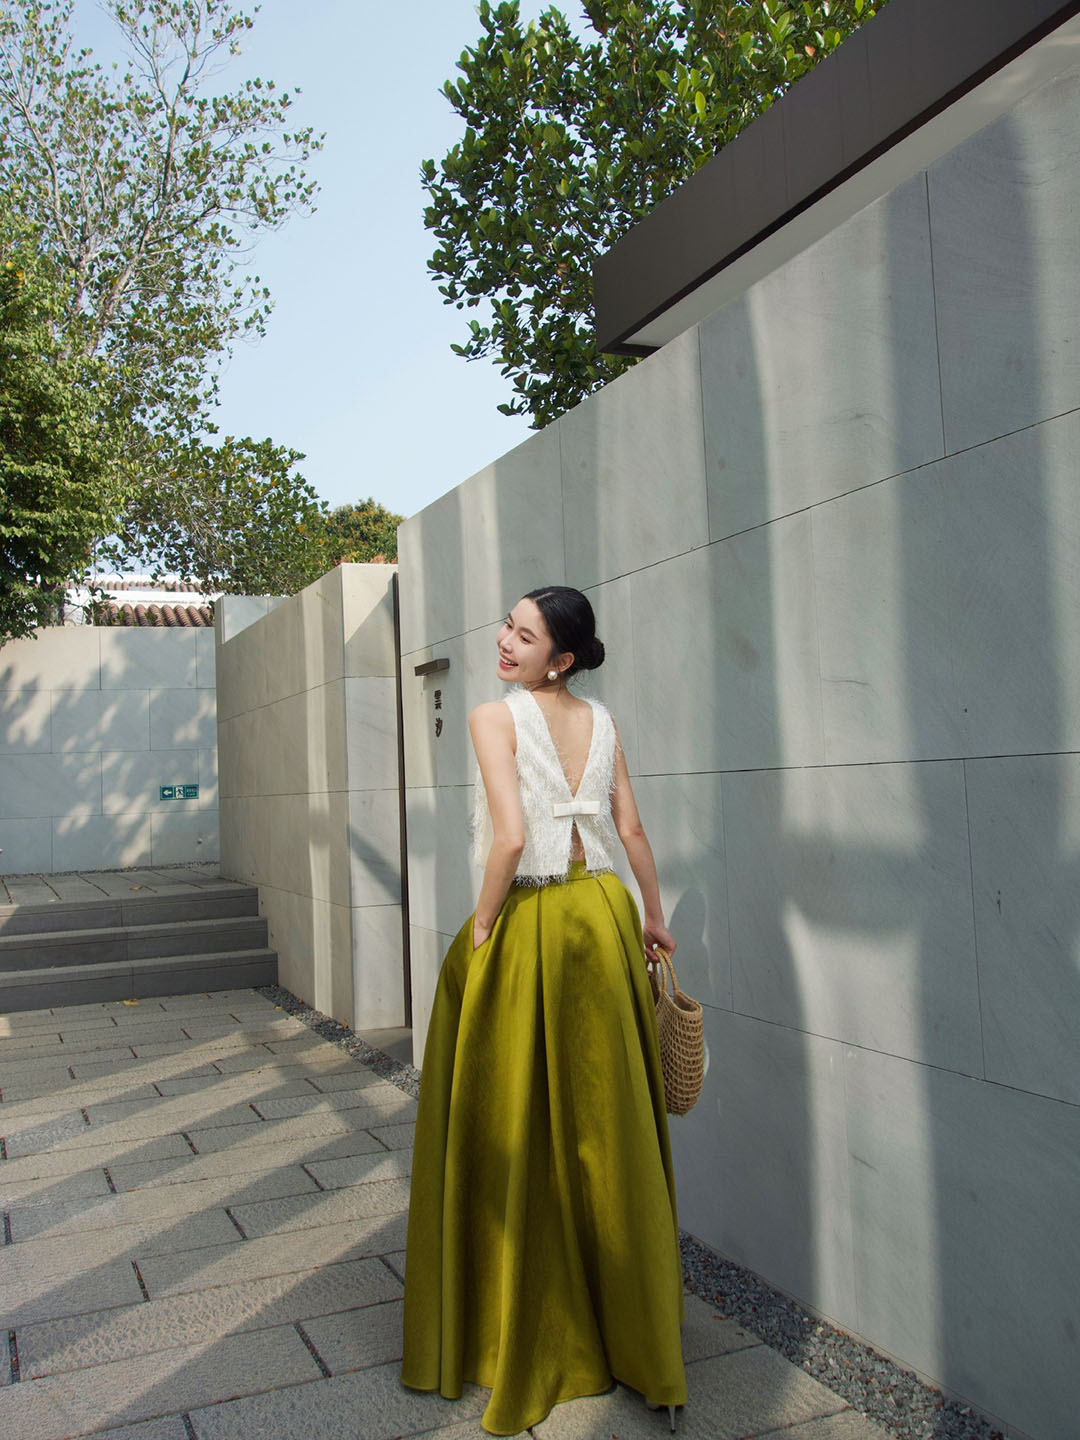 Elegant Two-Piece White Textured Sleeveless Top with Flowing Olive Green Maxi Skirt - Harmony Gallery